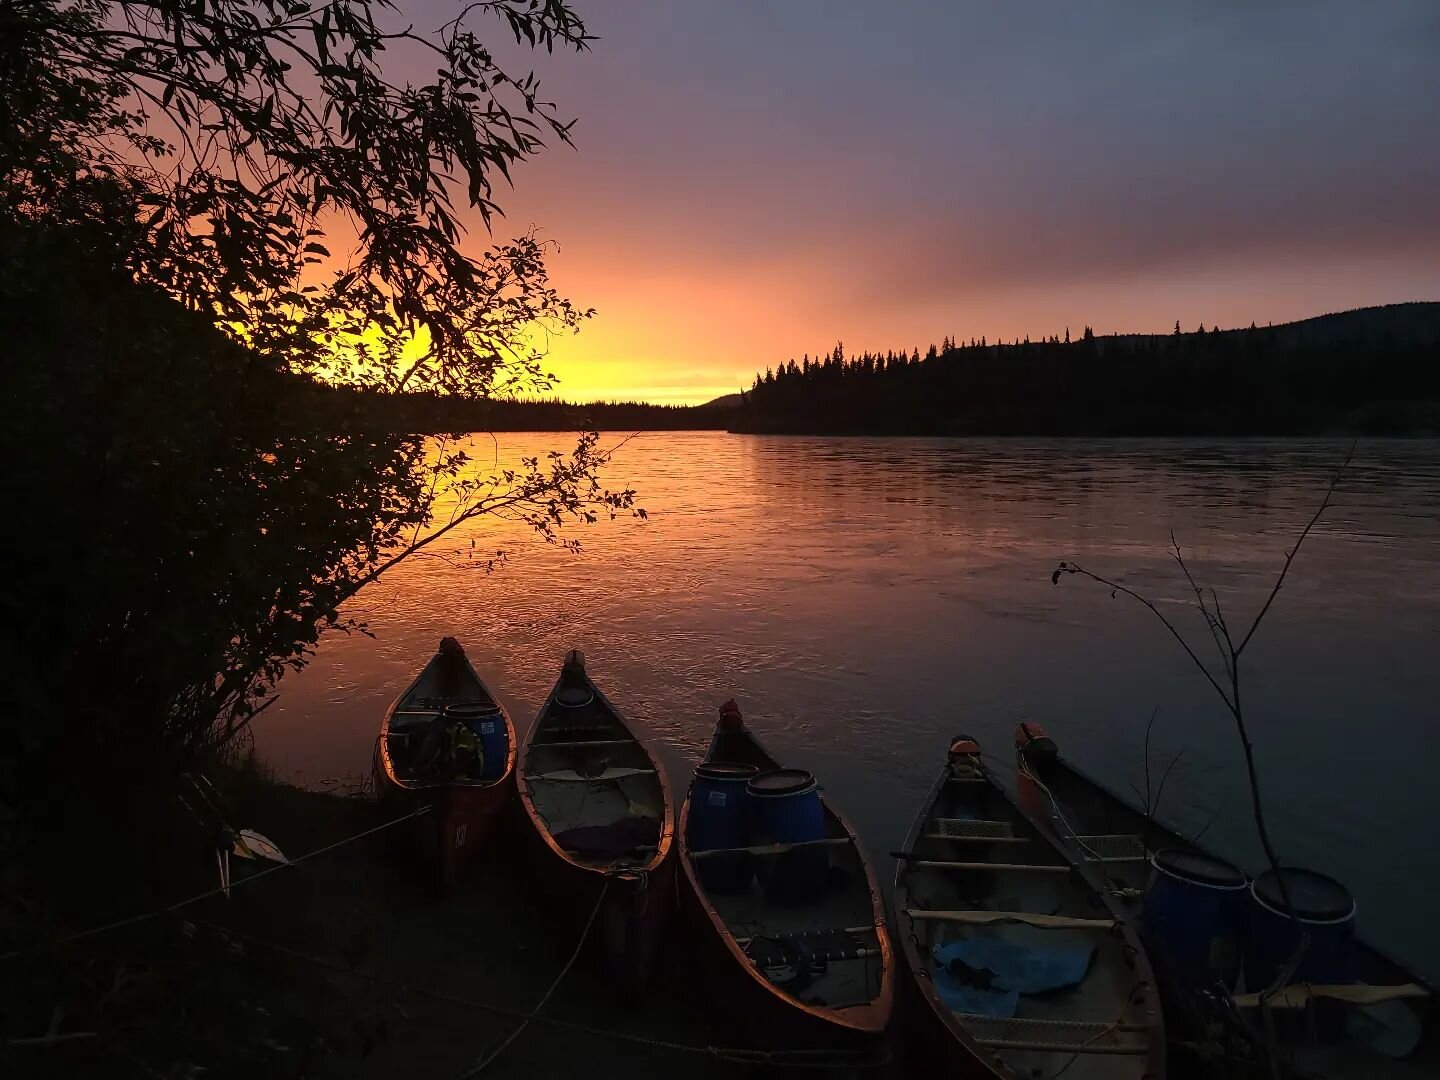 Just completed my last canoe trip of the 2022 seasonnn!!! 

Mussi cho to the land, River, my co-guides and friends along the way!!!